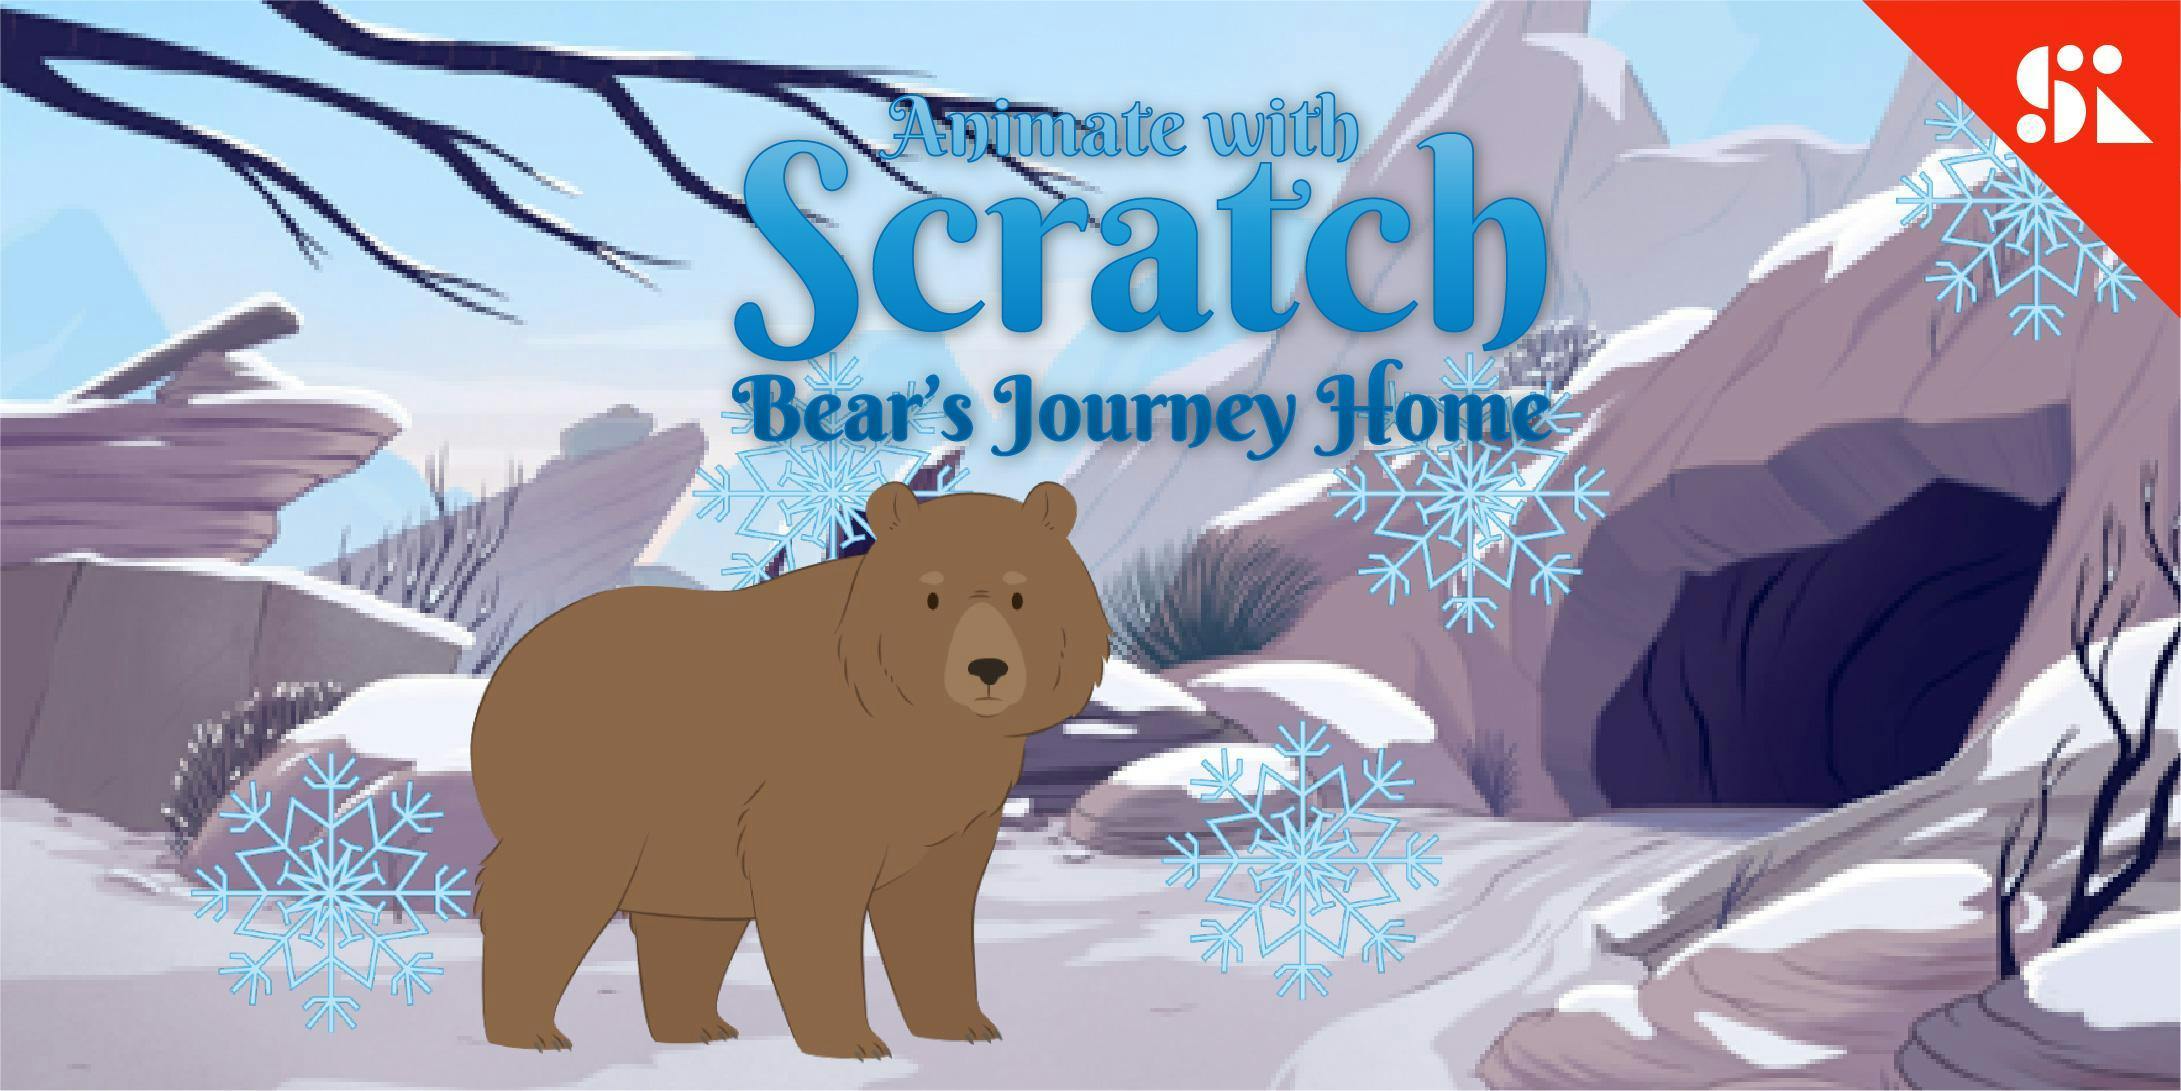 Animate With Scratch Journey Home With Bear Ages 7 10 9 Jun Sun 2 00pm East Coast 9 Jun 19